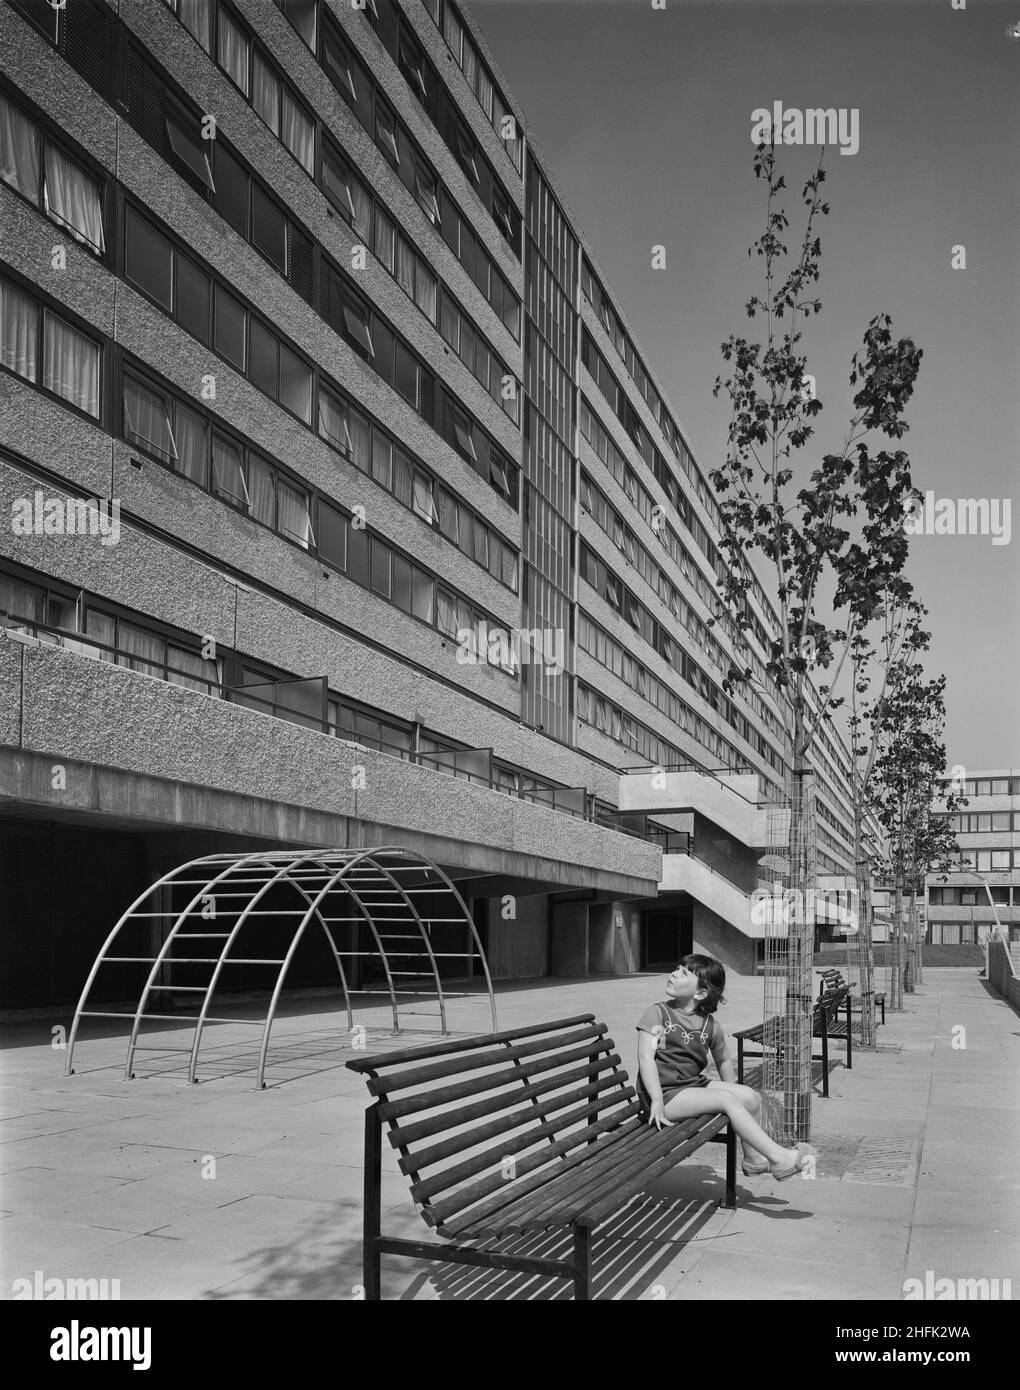 Aylesbury Estate, Walworth, Southwark, London, 01/05/1971. A young girl seated on a bench in front of a recently completed block of flats on the Aylesbury Estate, built using the 12M Jespersen system. In 1963, John Laing and Son Ltd bought the rights to the Danish industrialised building system for flats known as Jespersen (sometimes referred to as Jesperson). The company built factories in Scotland, Hampshire and Lancashire producing Jespersen prefabricated parts and precast concrete panels, allowing the building of housing to be rationalised, saving time and money. Laing's Southern Region st Stock Photo